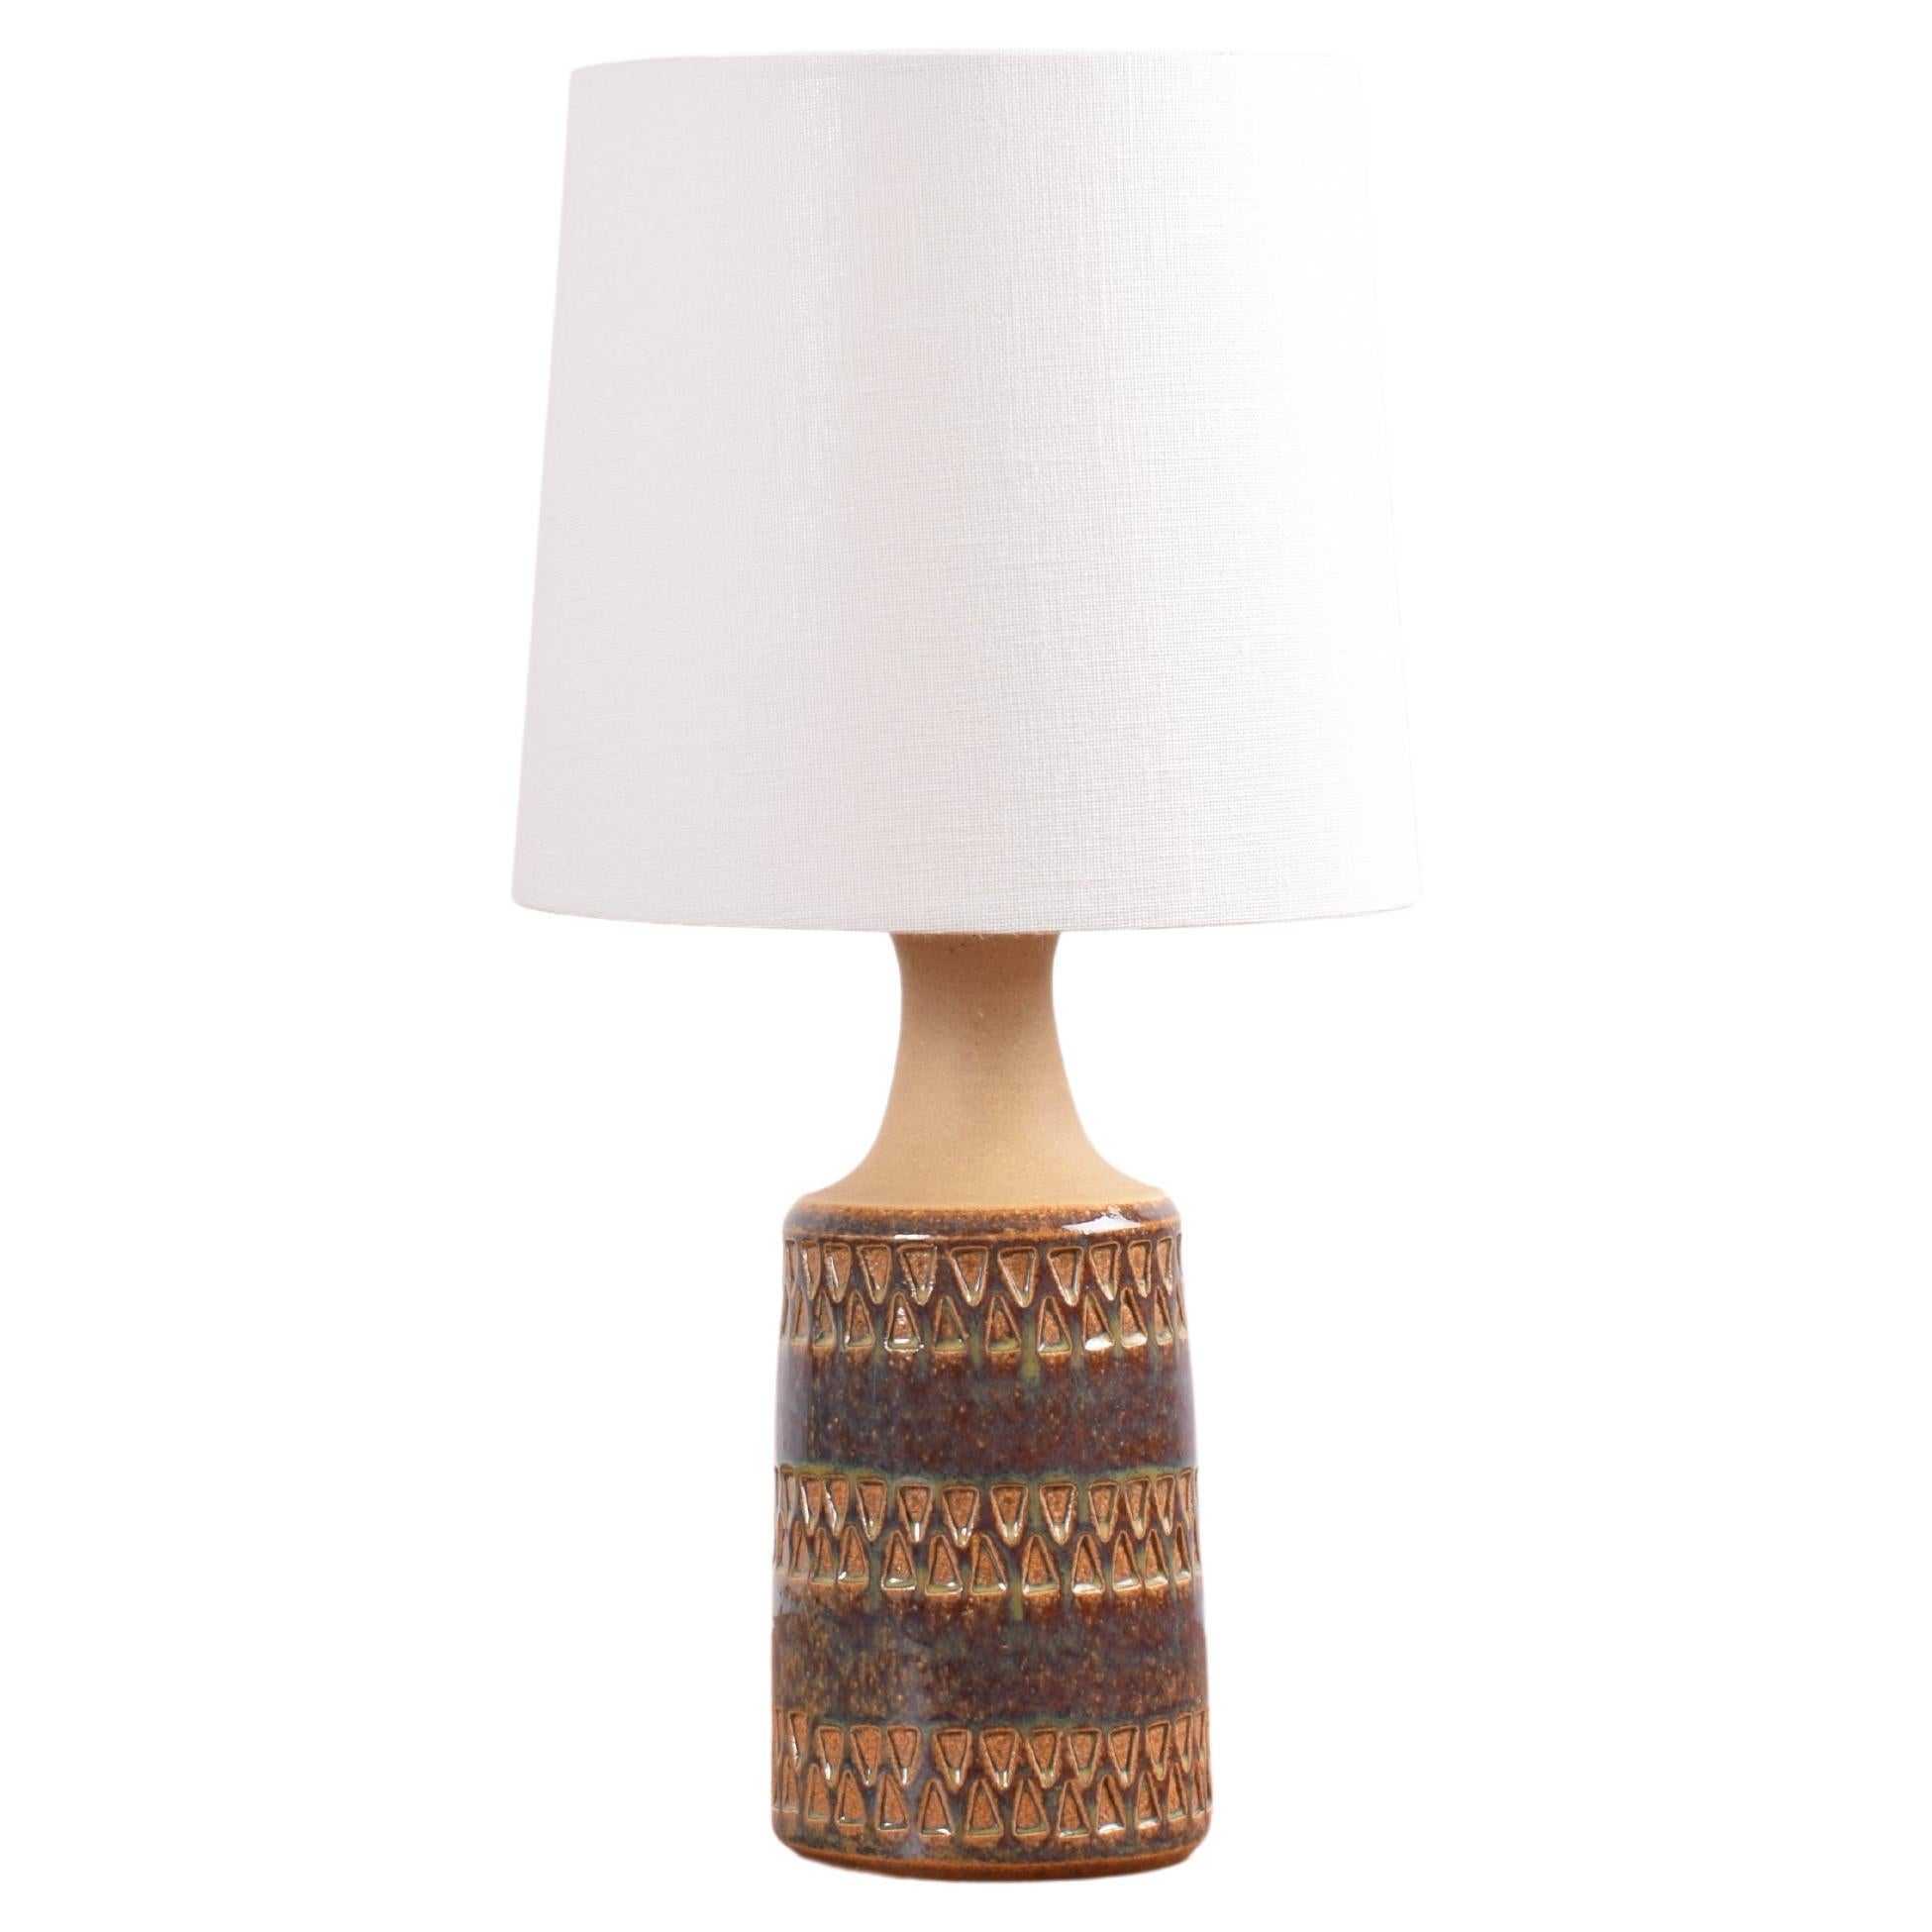 Danish Midcentury Søholm Small Ceramic Table Lamp Brown Blue Glaze, 1960s For Sale